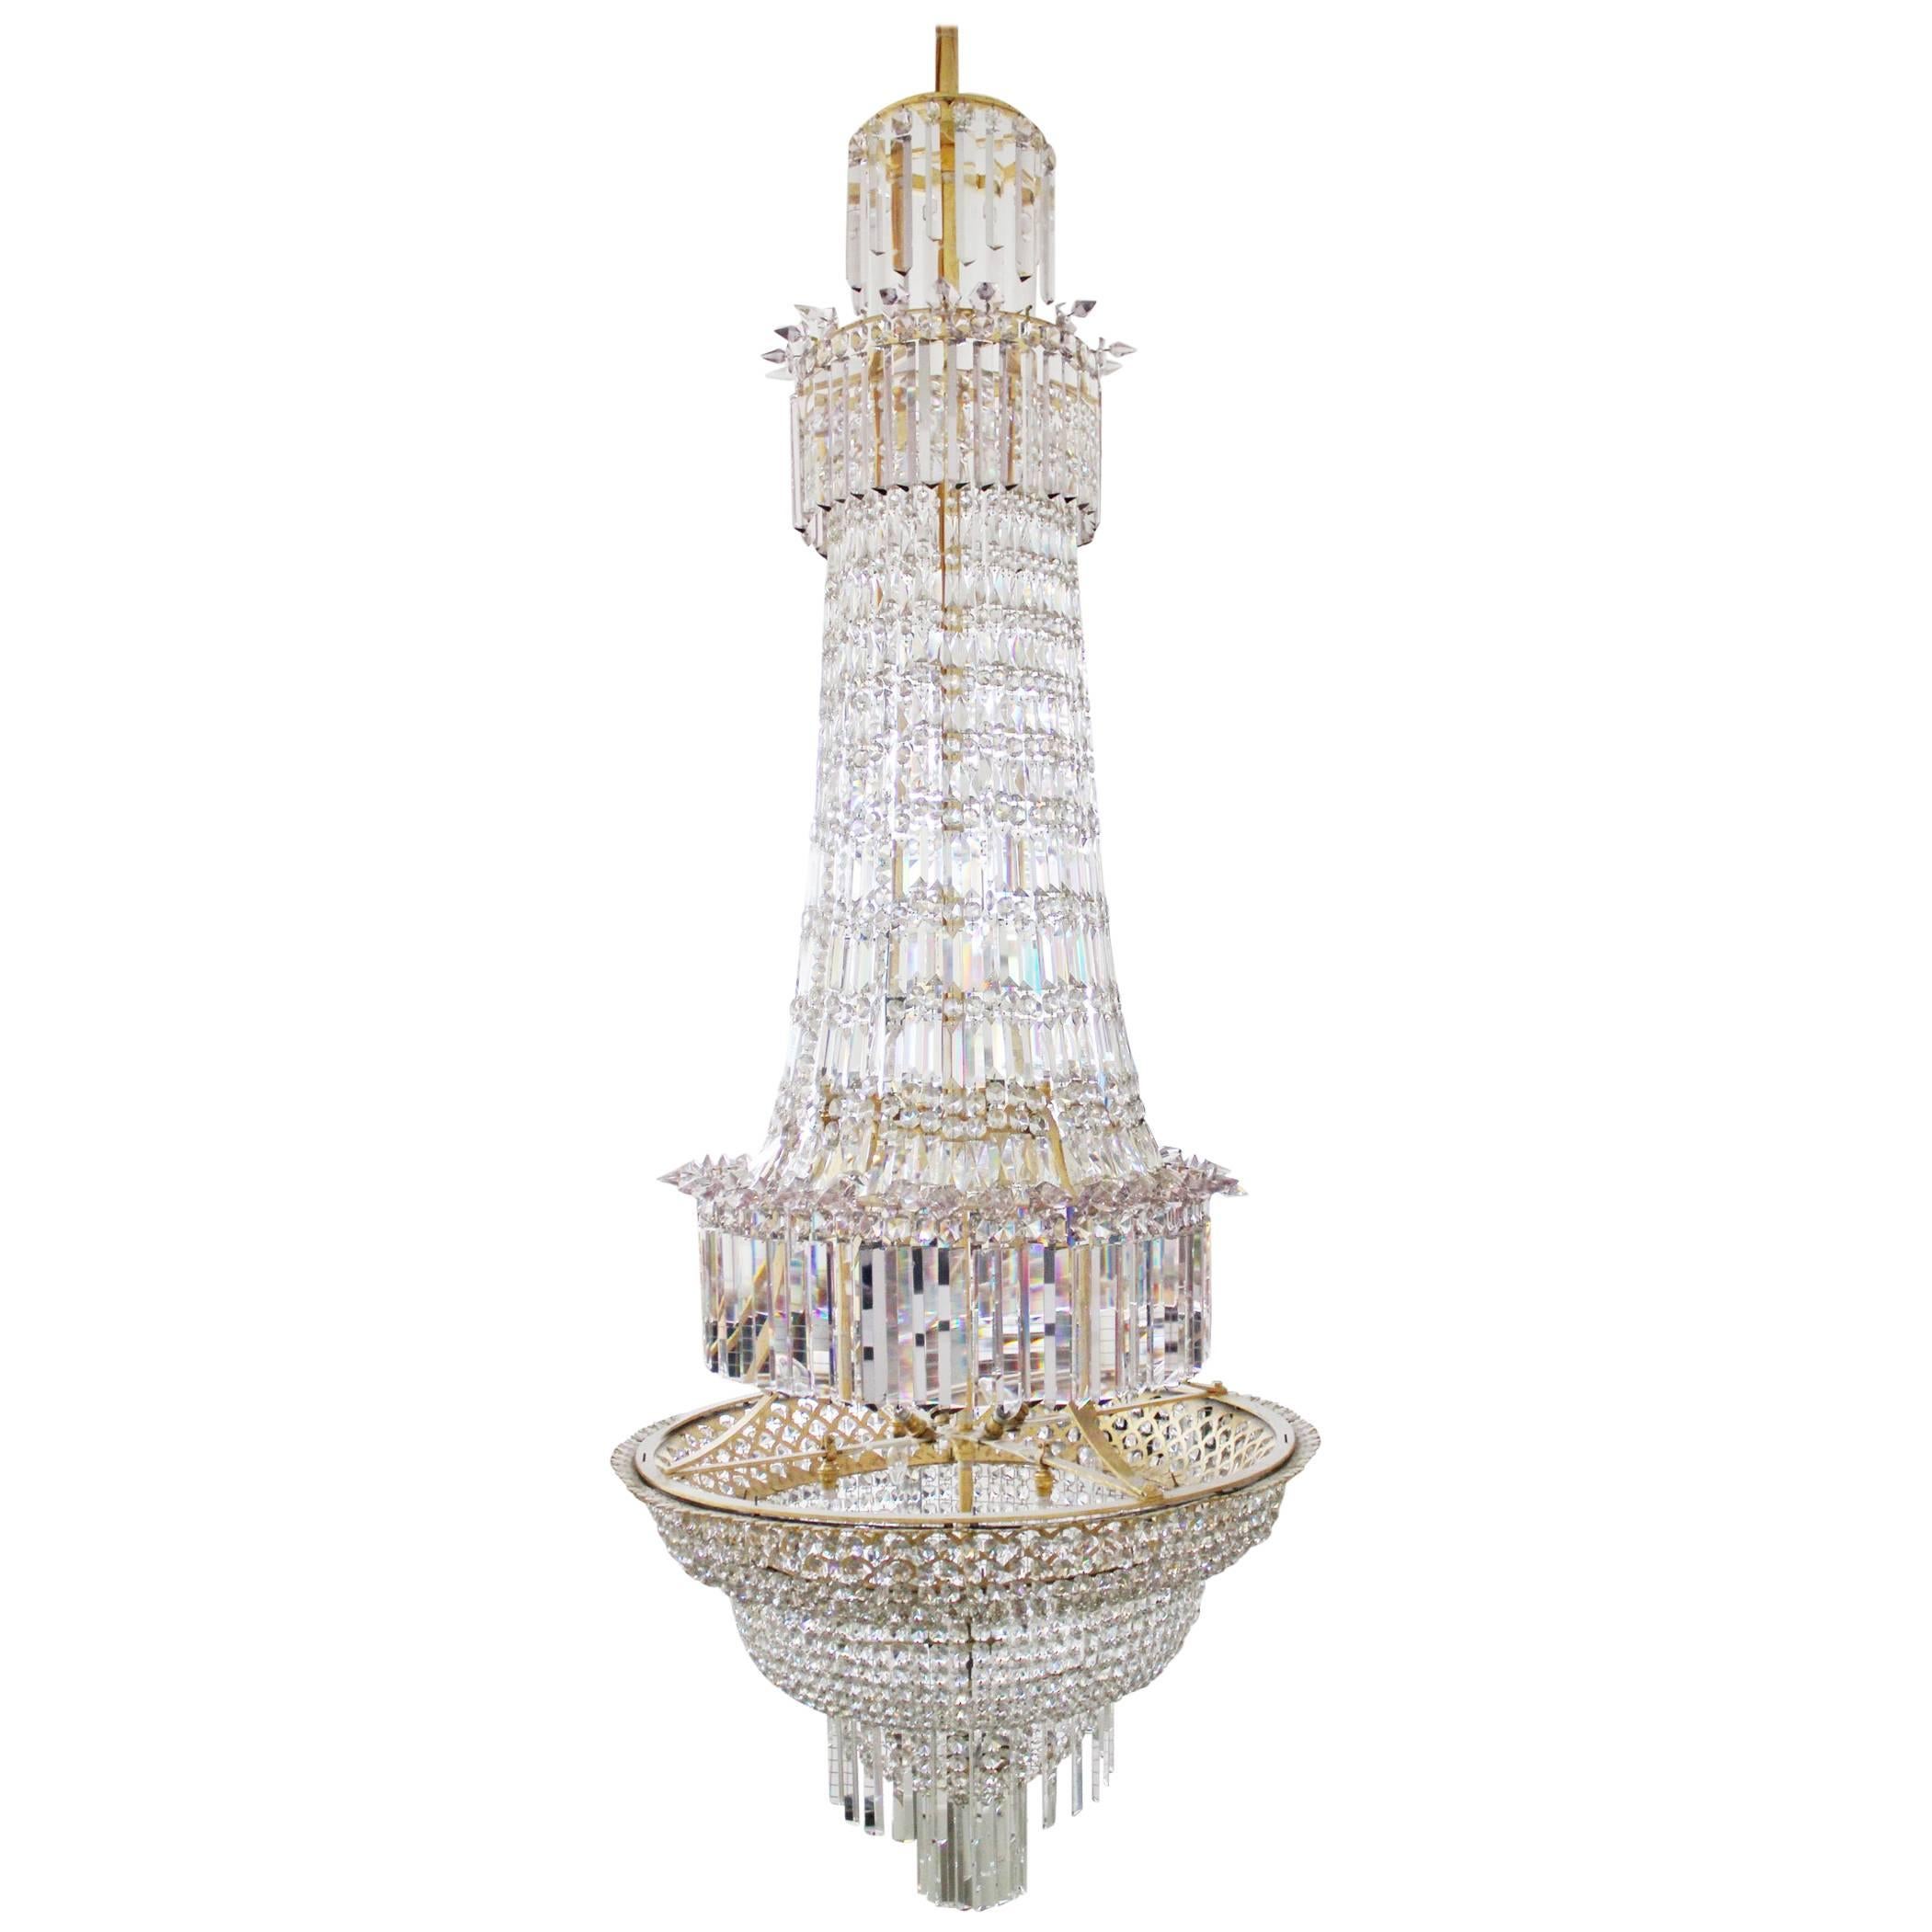 19th Century English Crystal Cut Glass Chandelier, Fully Restored. For Sale